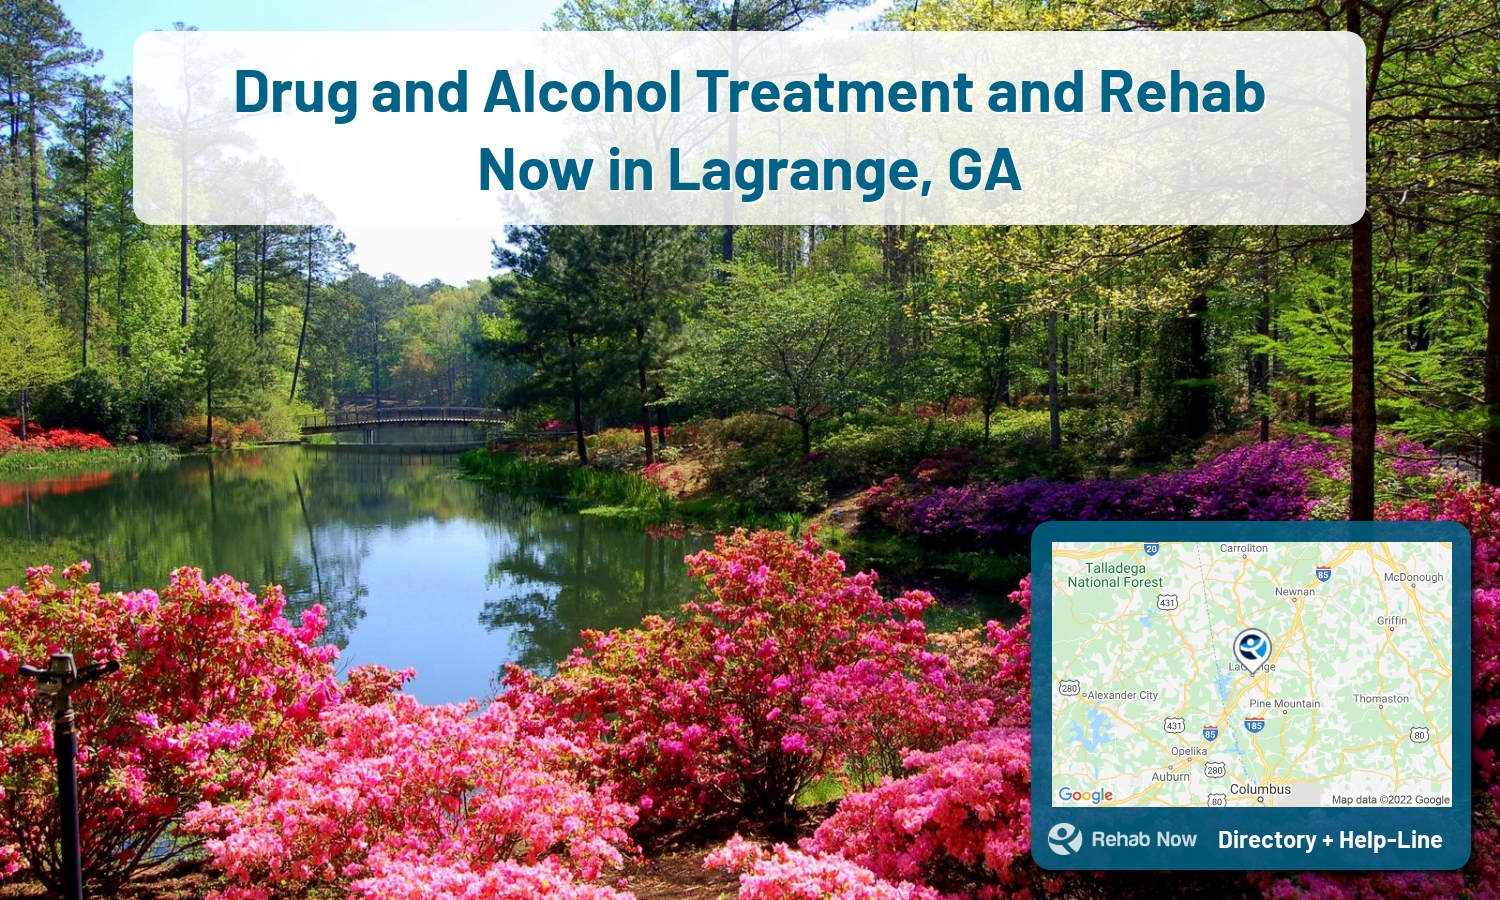 Ready to pick a rehab center in Lagrange? Get off alcohol, opiates, and other drugs, by selecting top drug rehab centers in Georgia